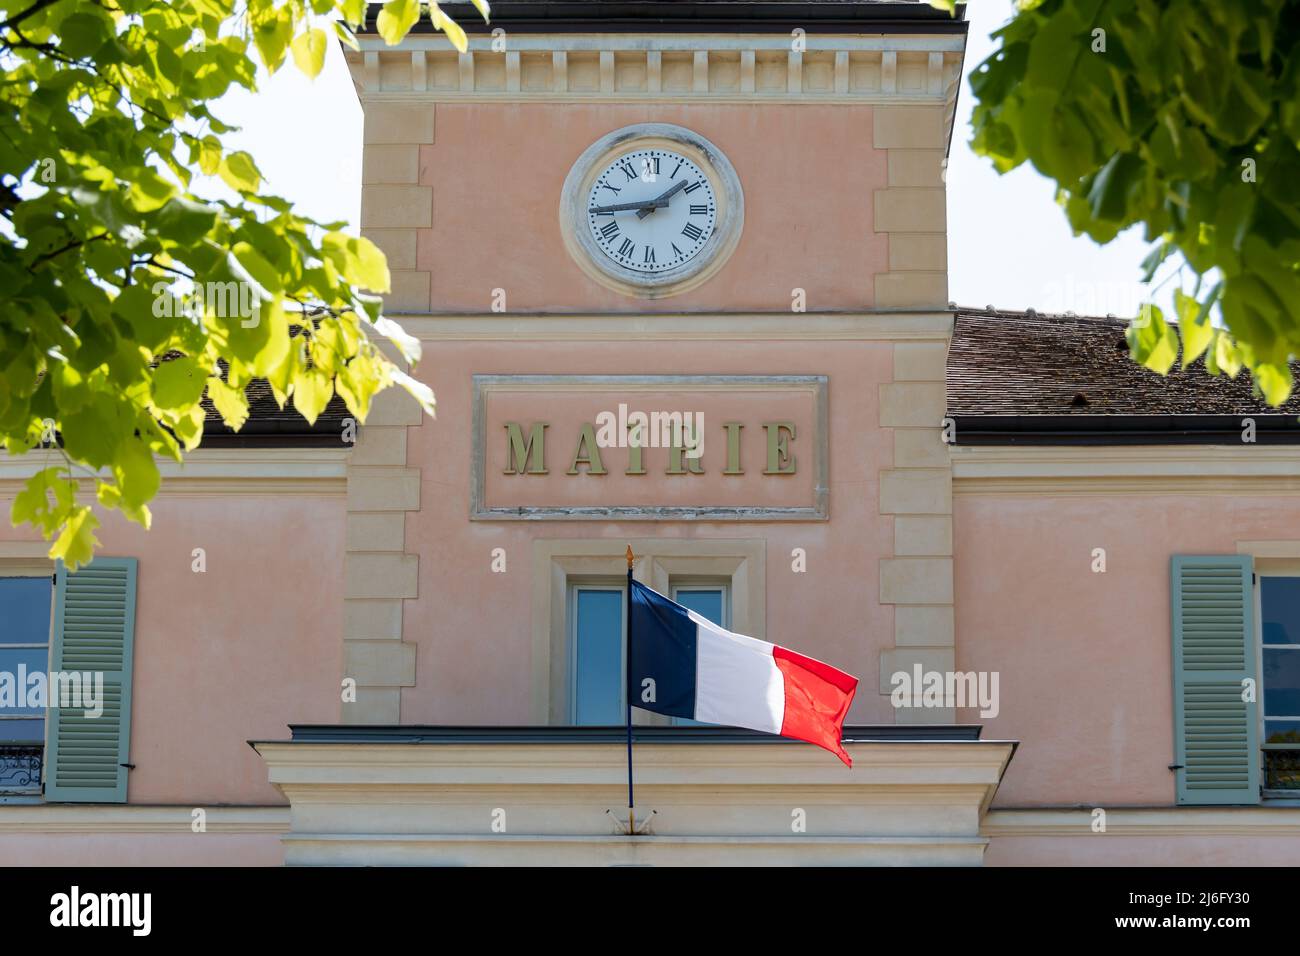 Exterior view of the town hall of Marnes-la-Coquette, a French city in the western suburbs of Paris, located in the Hauts-de-Seine department Stock Photo